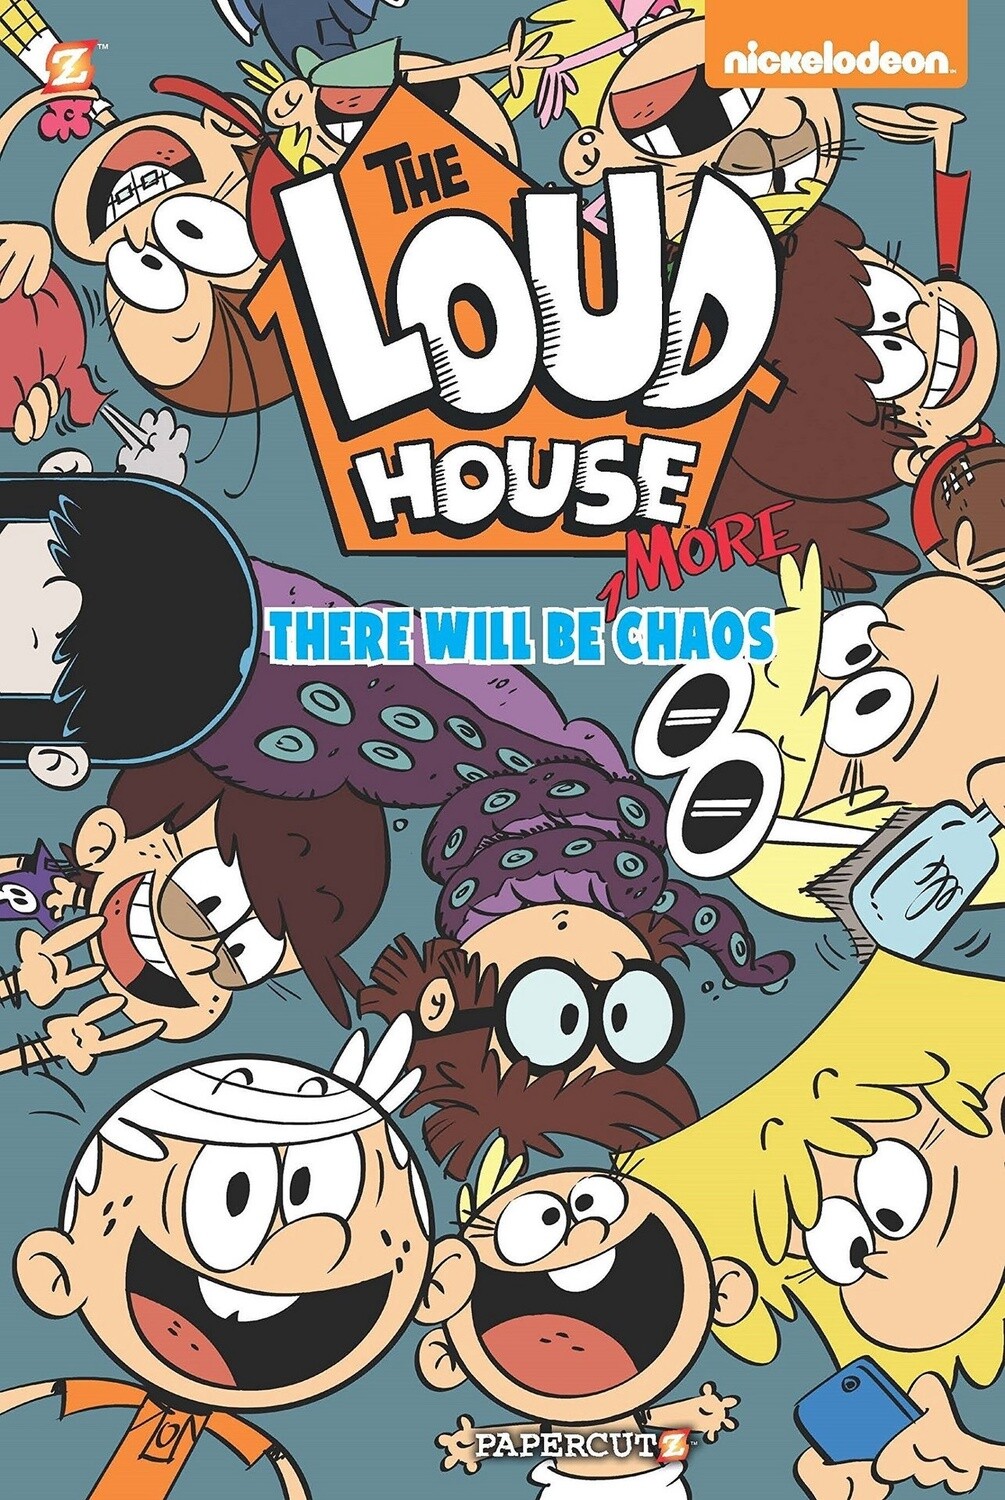 Loud House Vol. 2: There Will be MORE Chaos